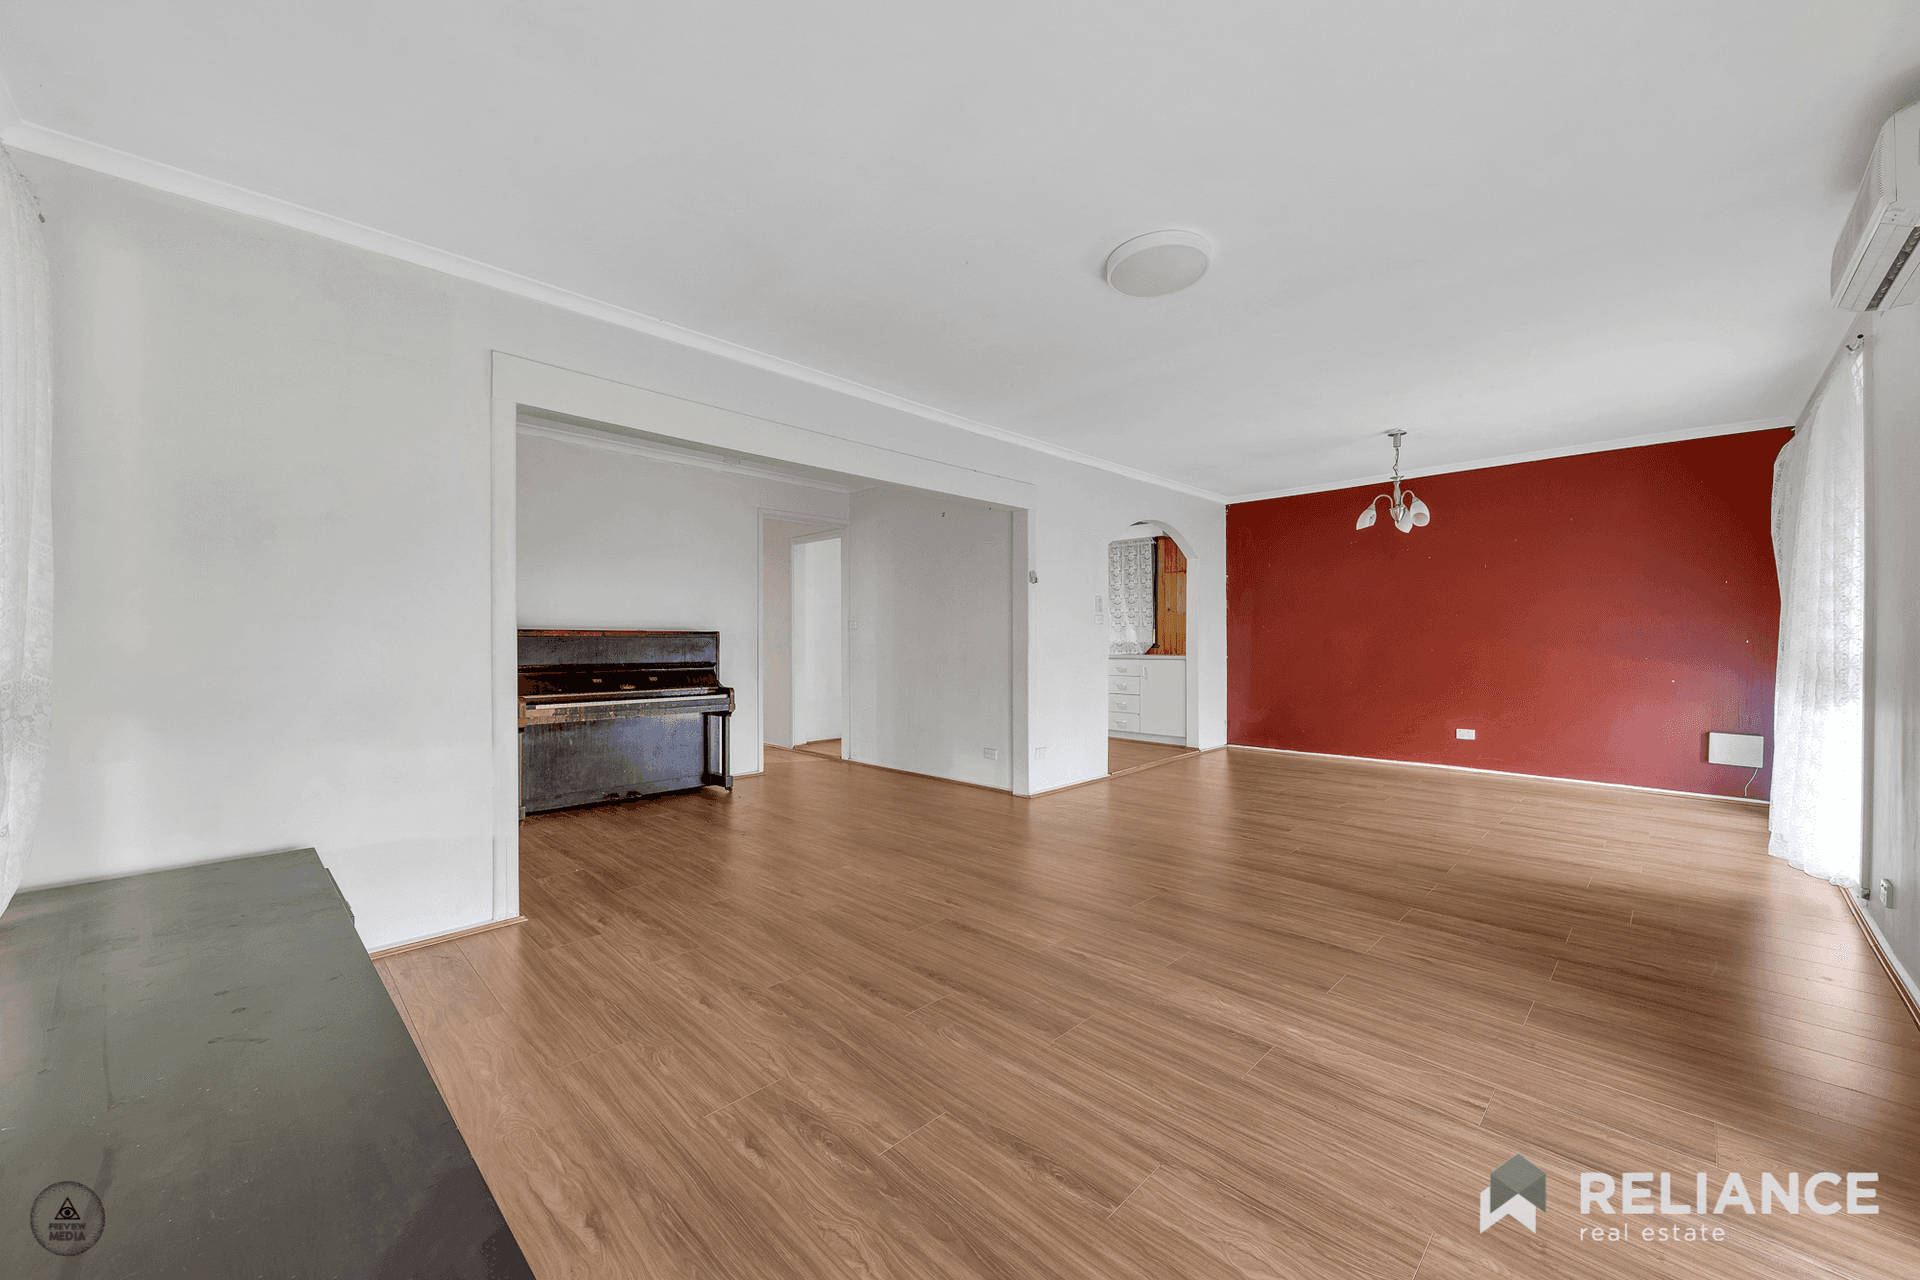 125 Barries Road, Melton, VIC 3337